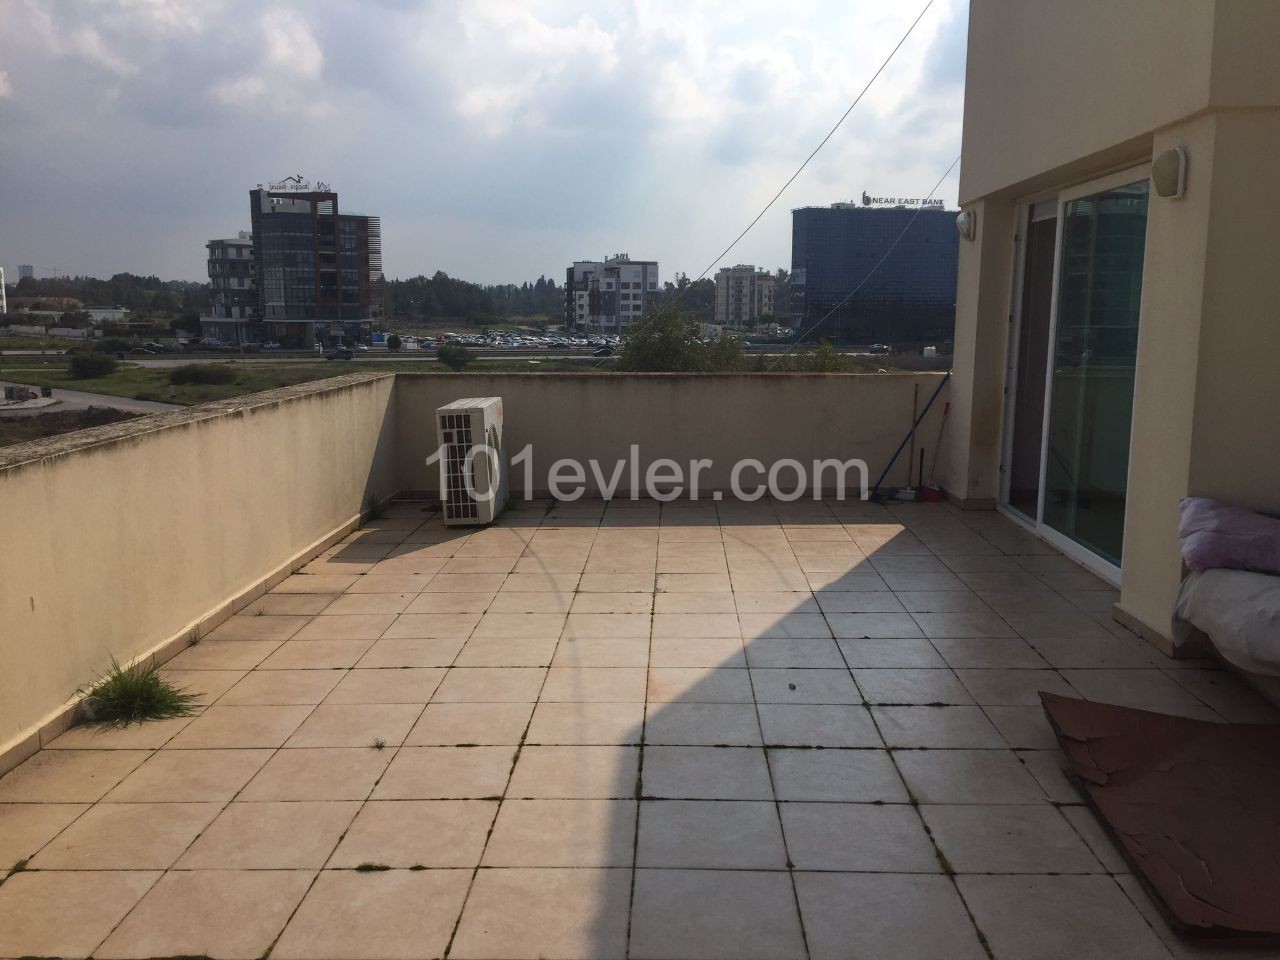 2-Bedroom Penthouse for Rent in Kermiya District ** 